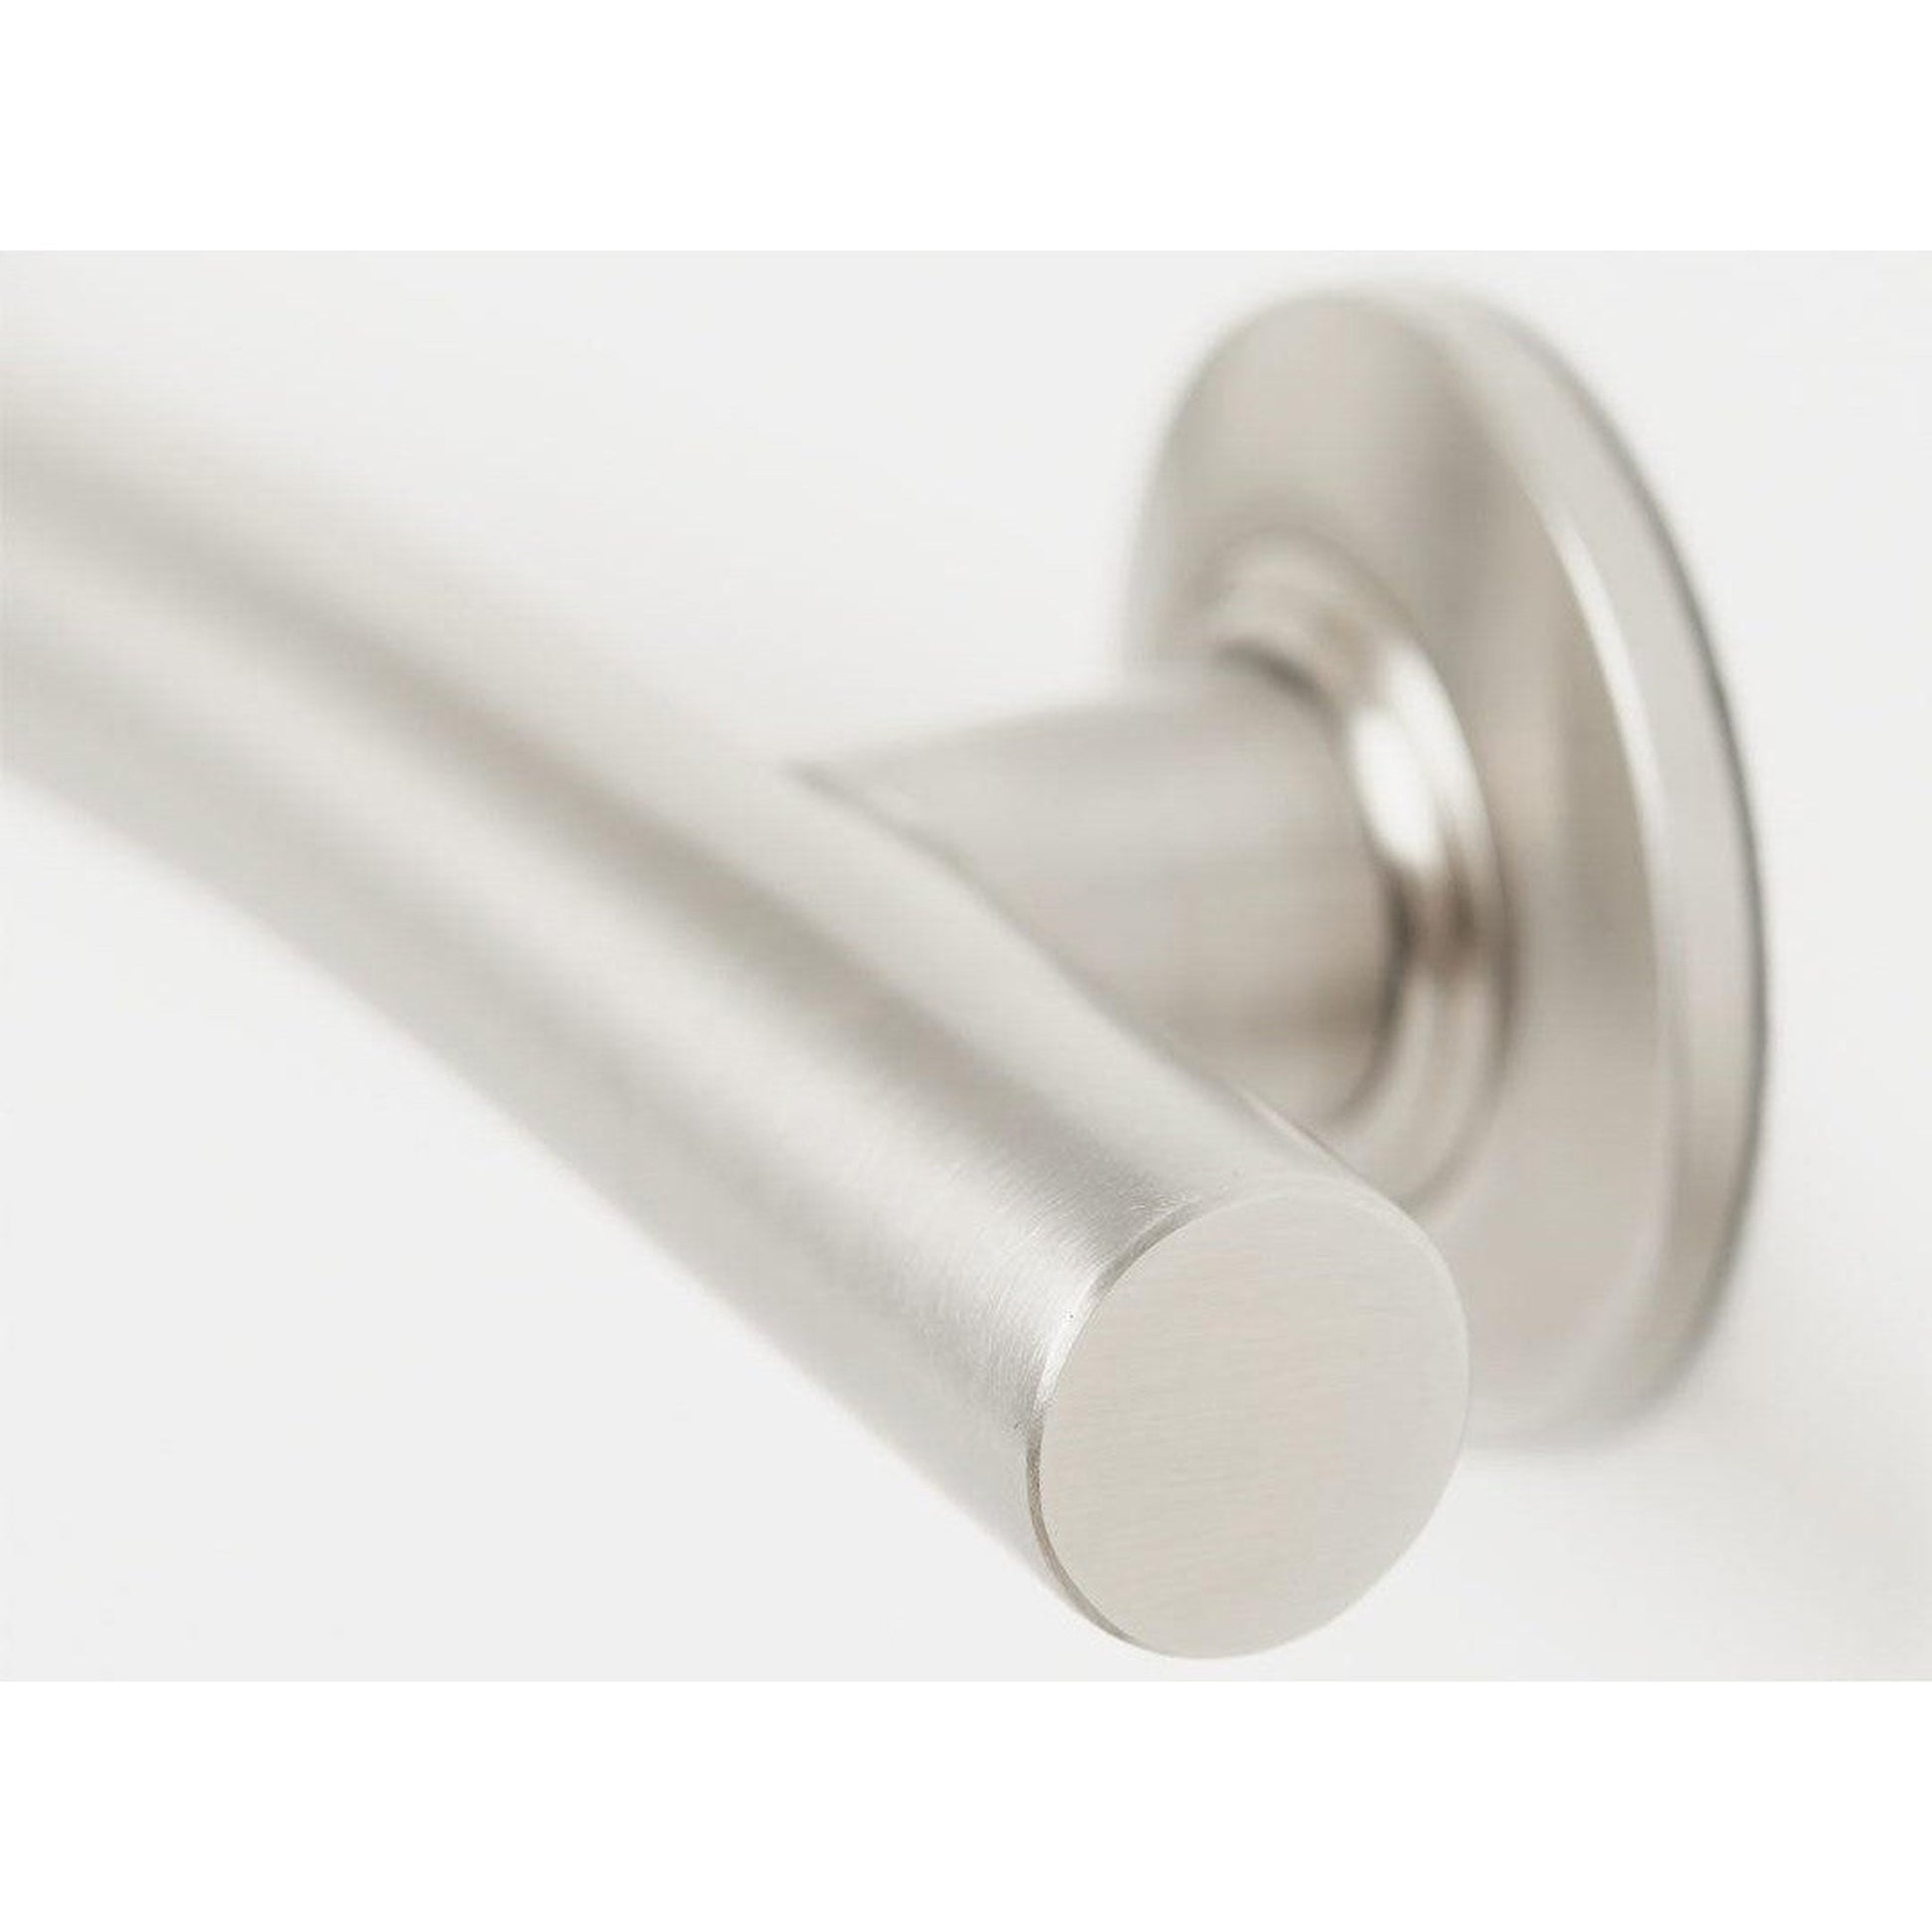 Seachrome Lifestyle & Wellness 48" Satin Stainless Steel 1.25 Diameter Concealed Flange Wave Grab Bar